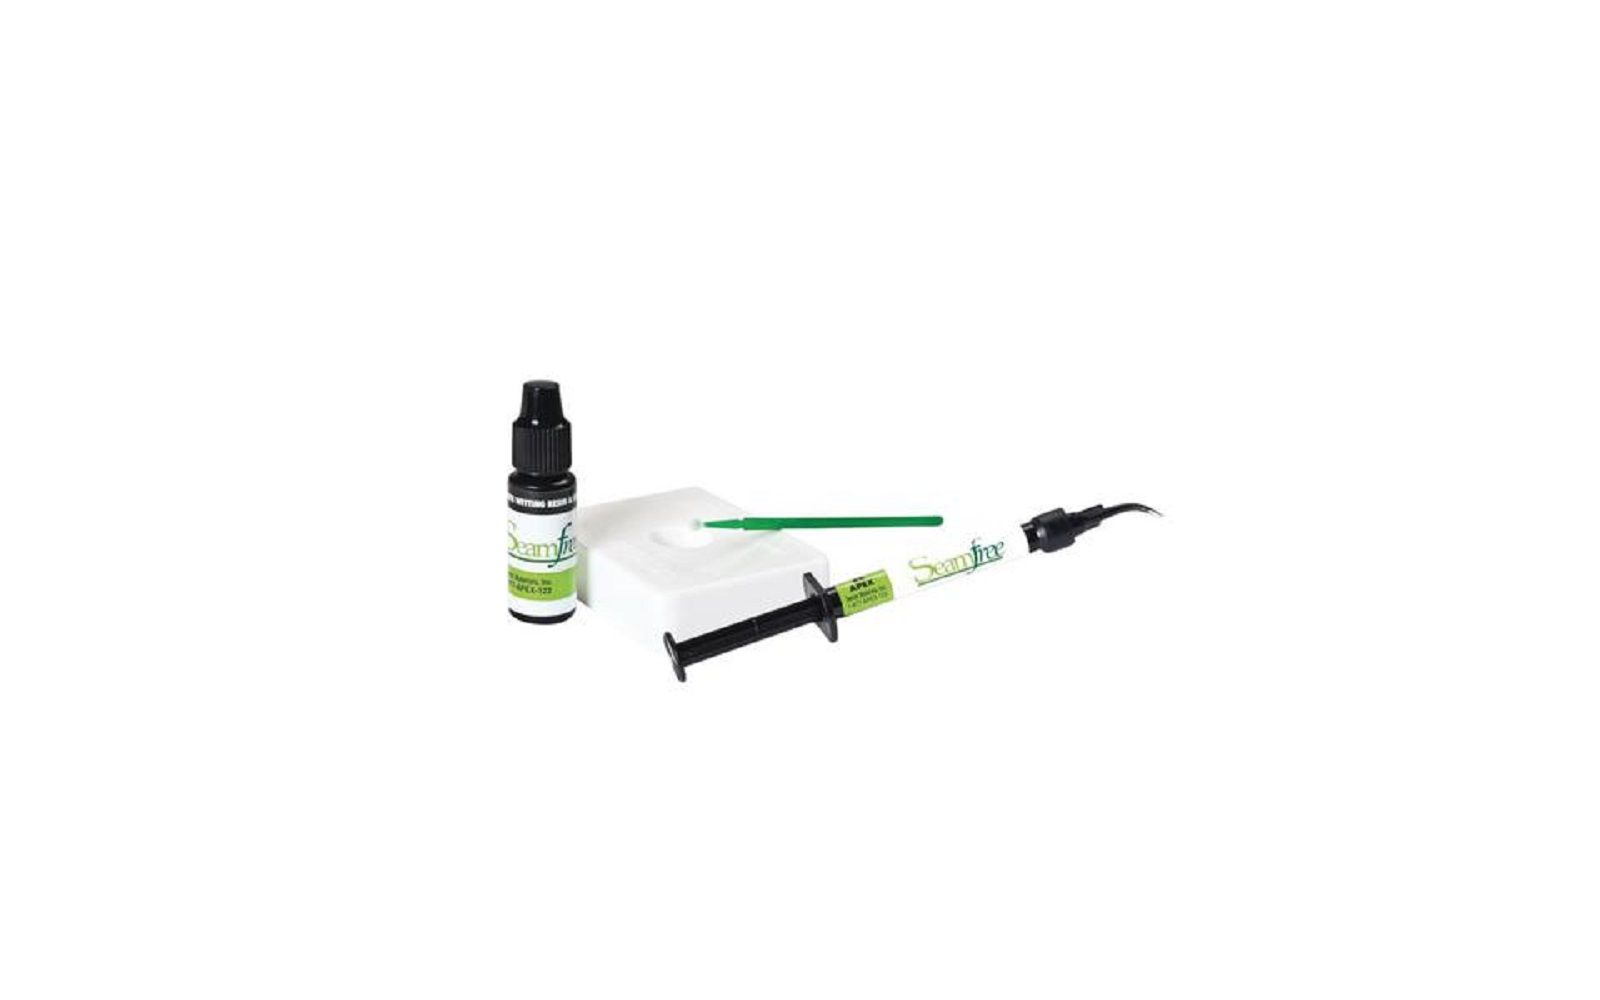 Seamfree composite wetting resin and lubricant 1 syringe kit